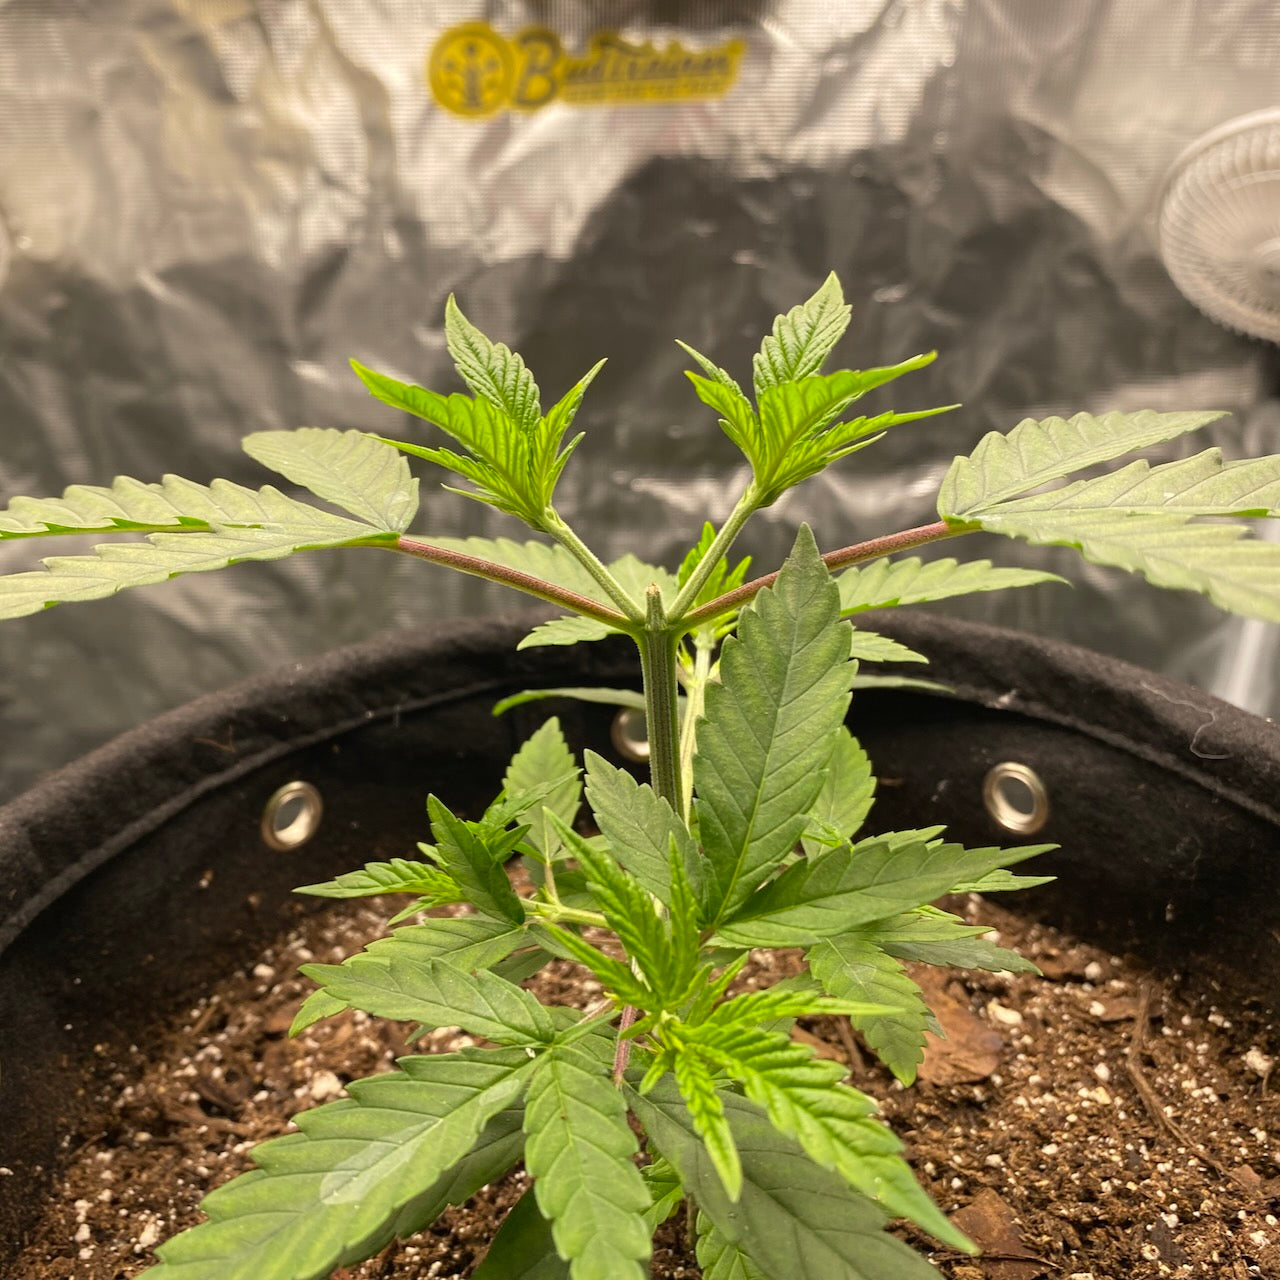 Cannabis plant during vegetative stage that was topped